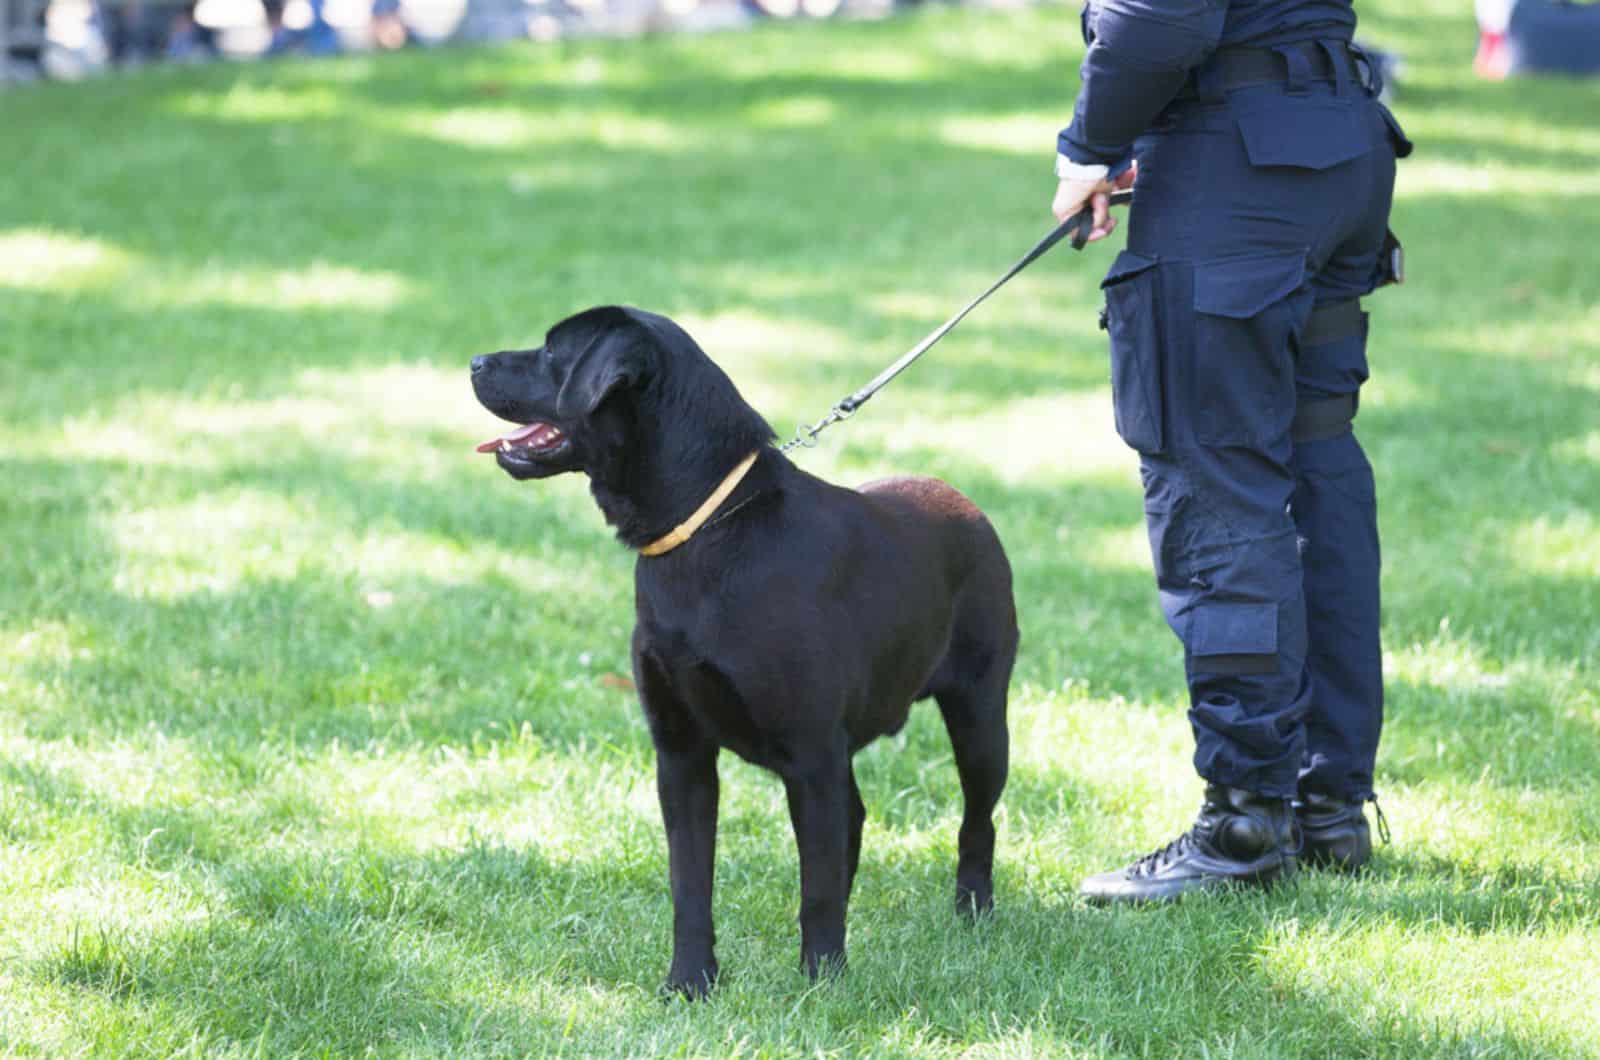 policeman with police dog on duty